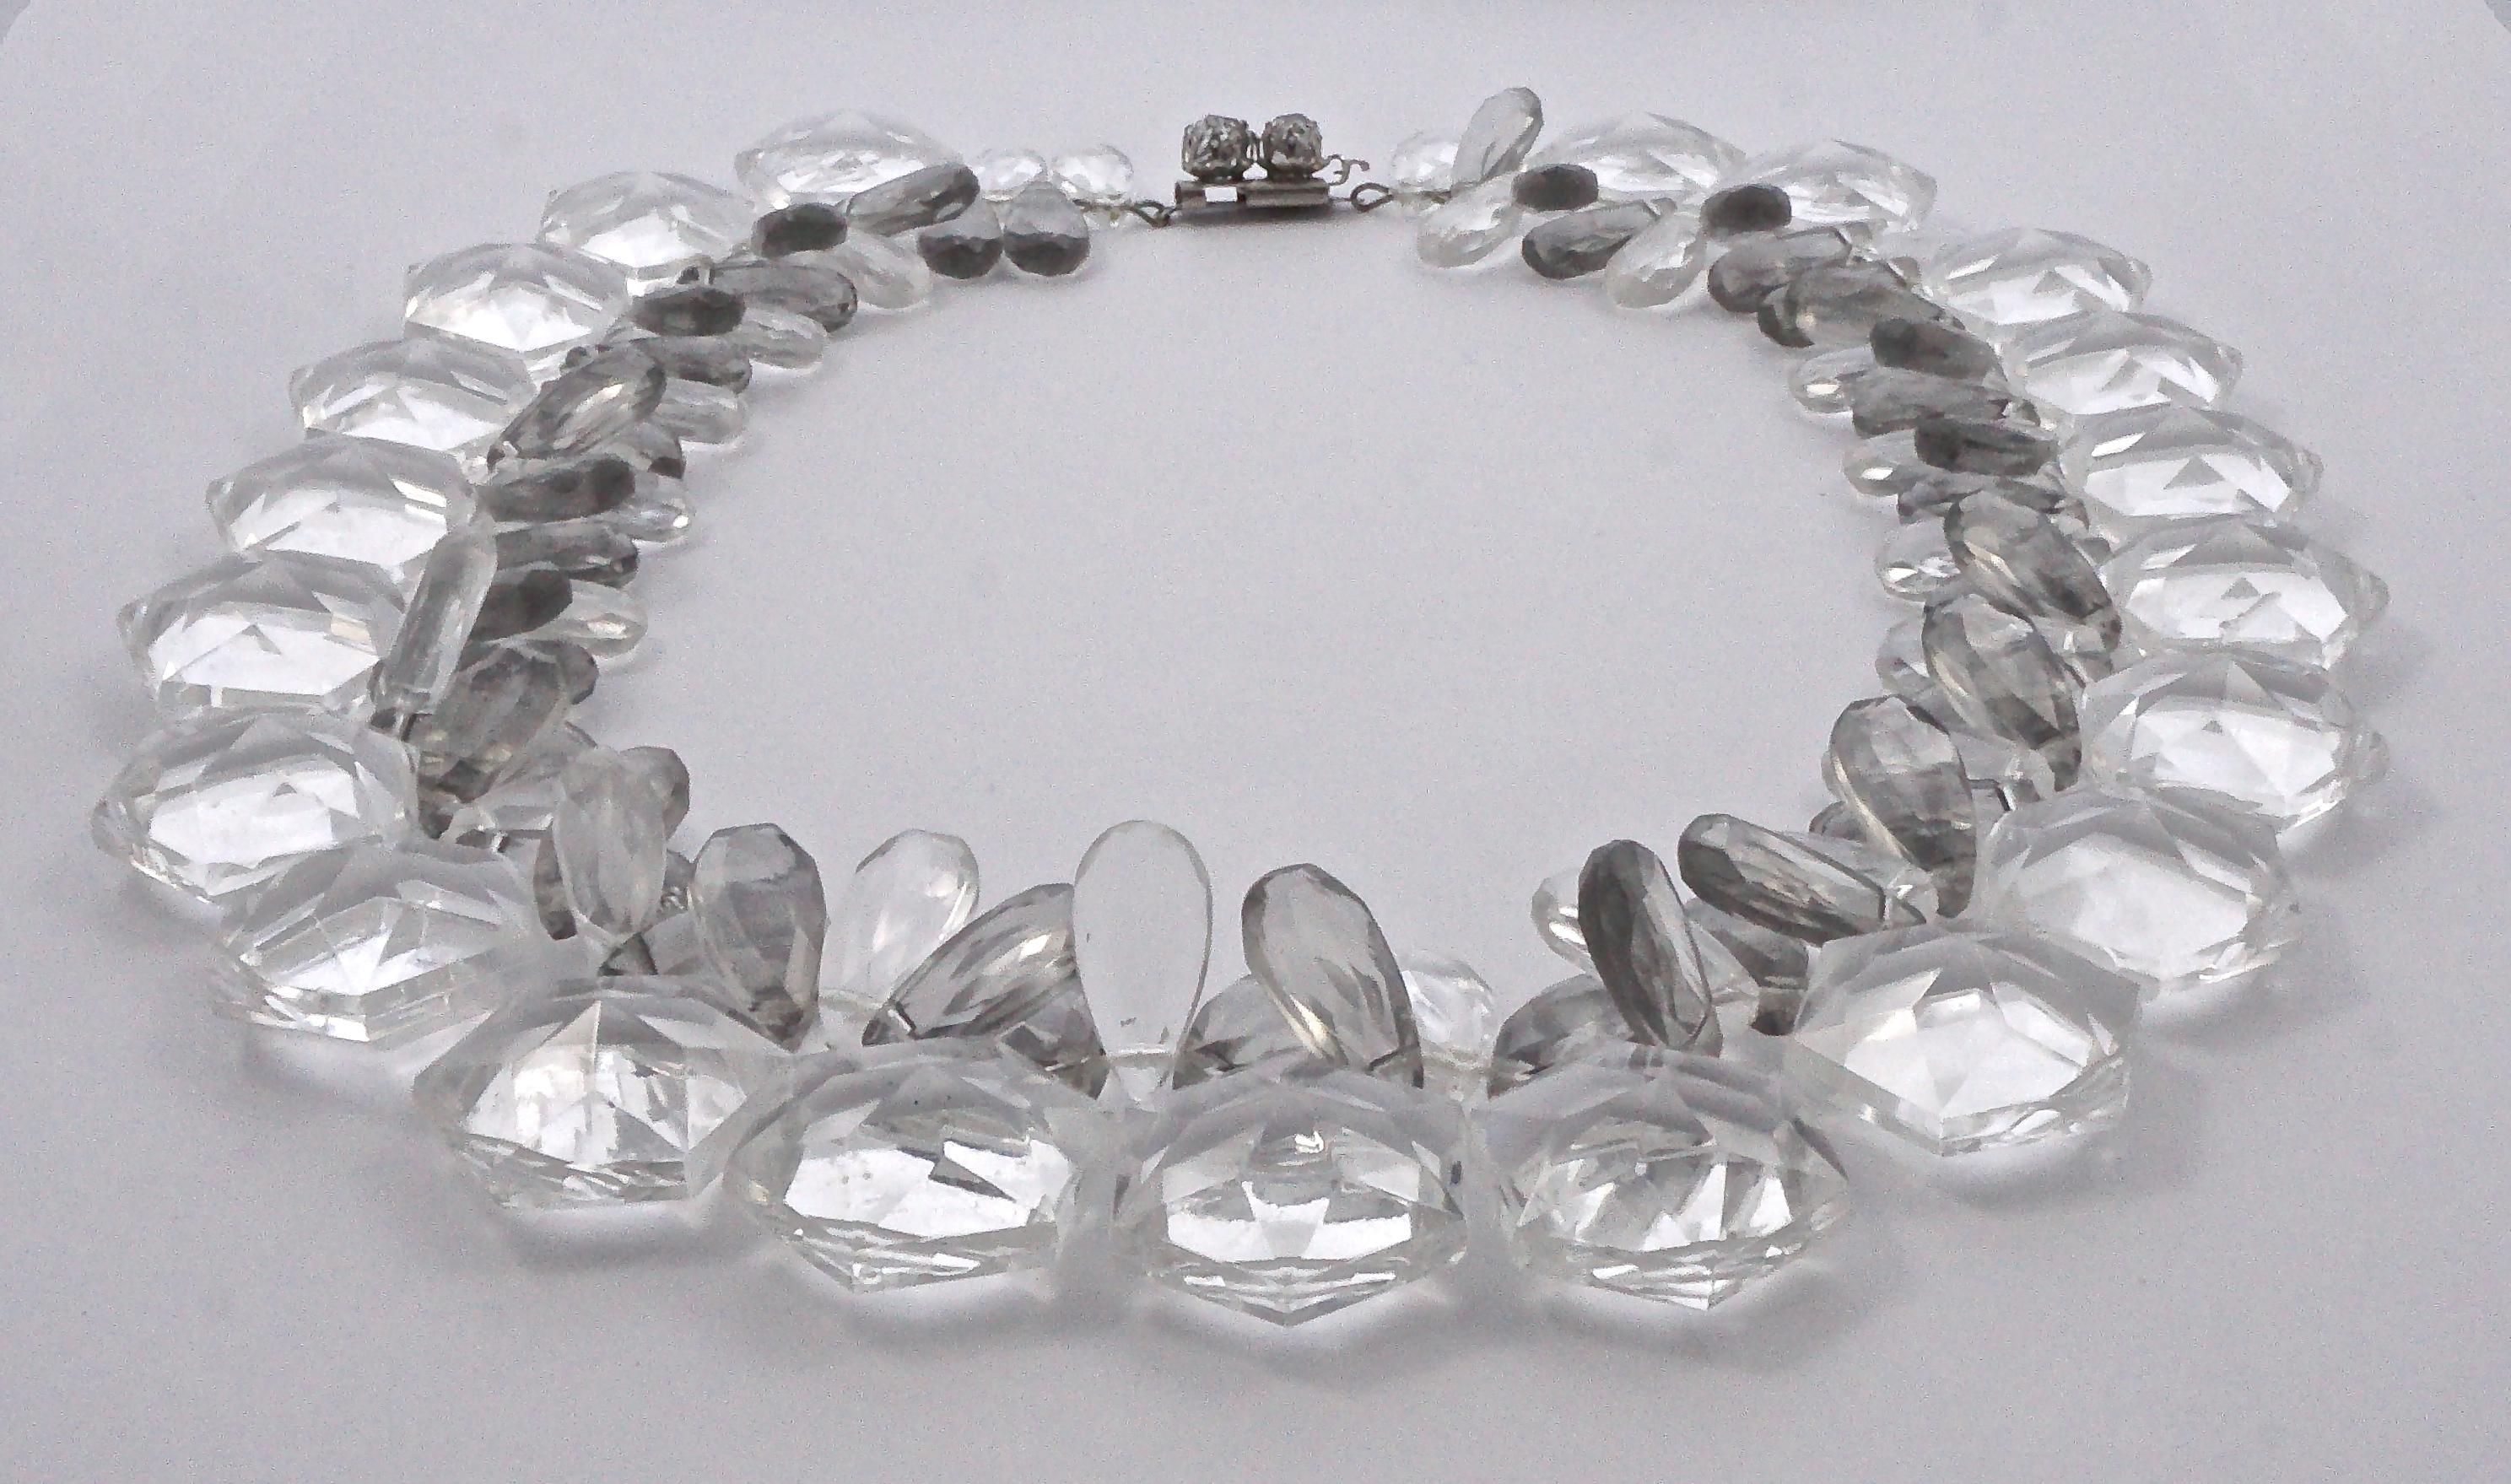 plastic silver bead necklace